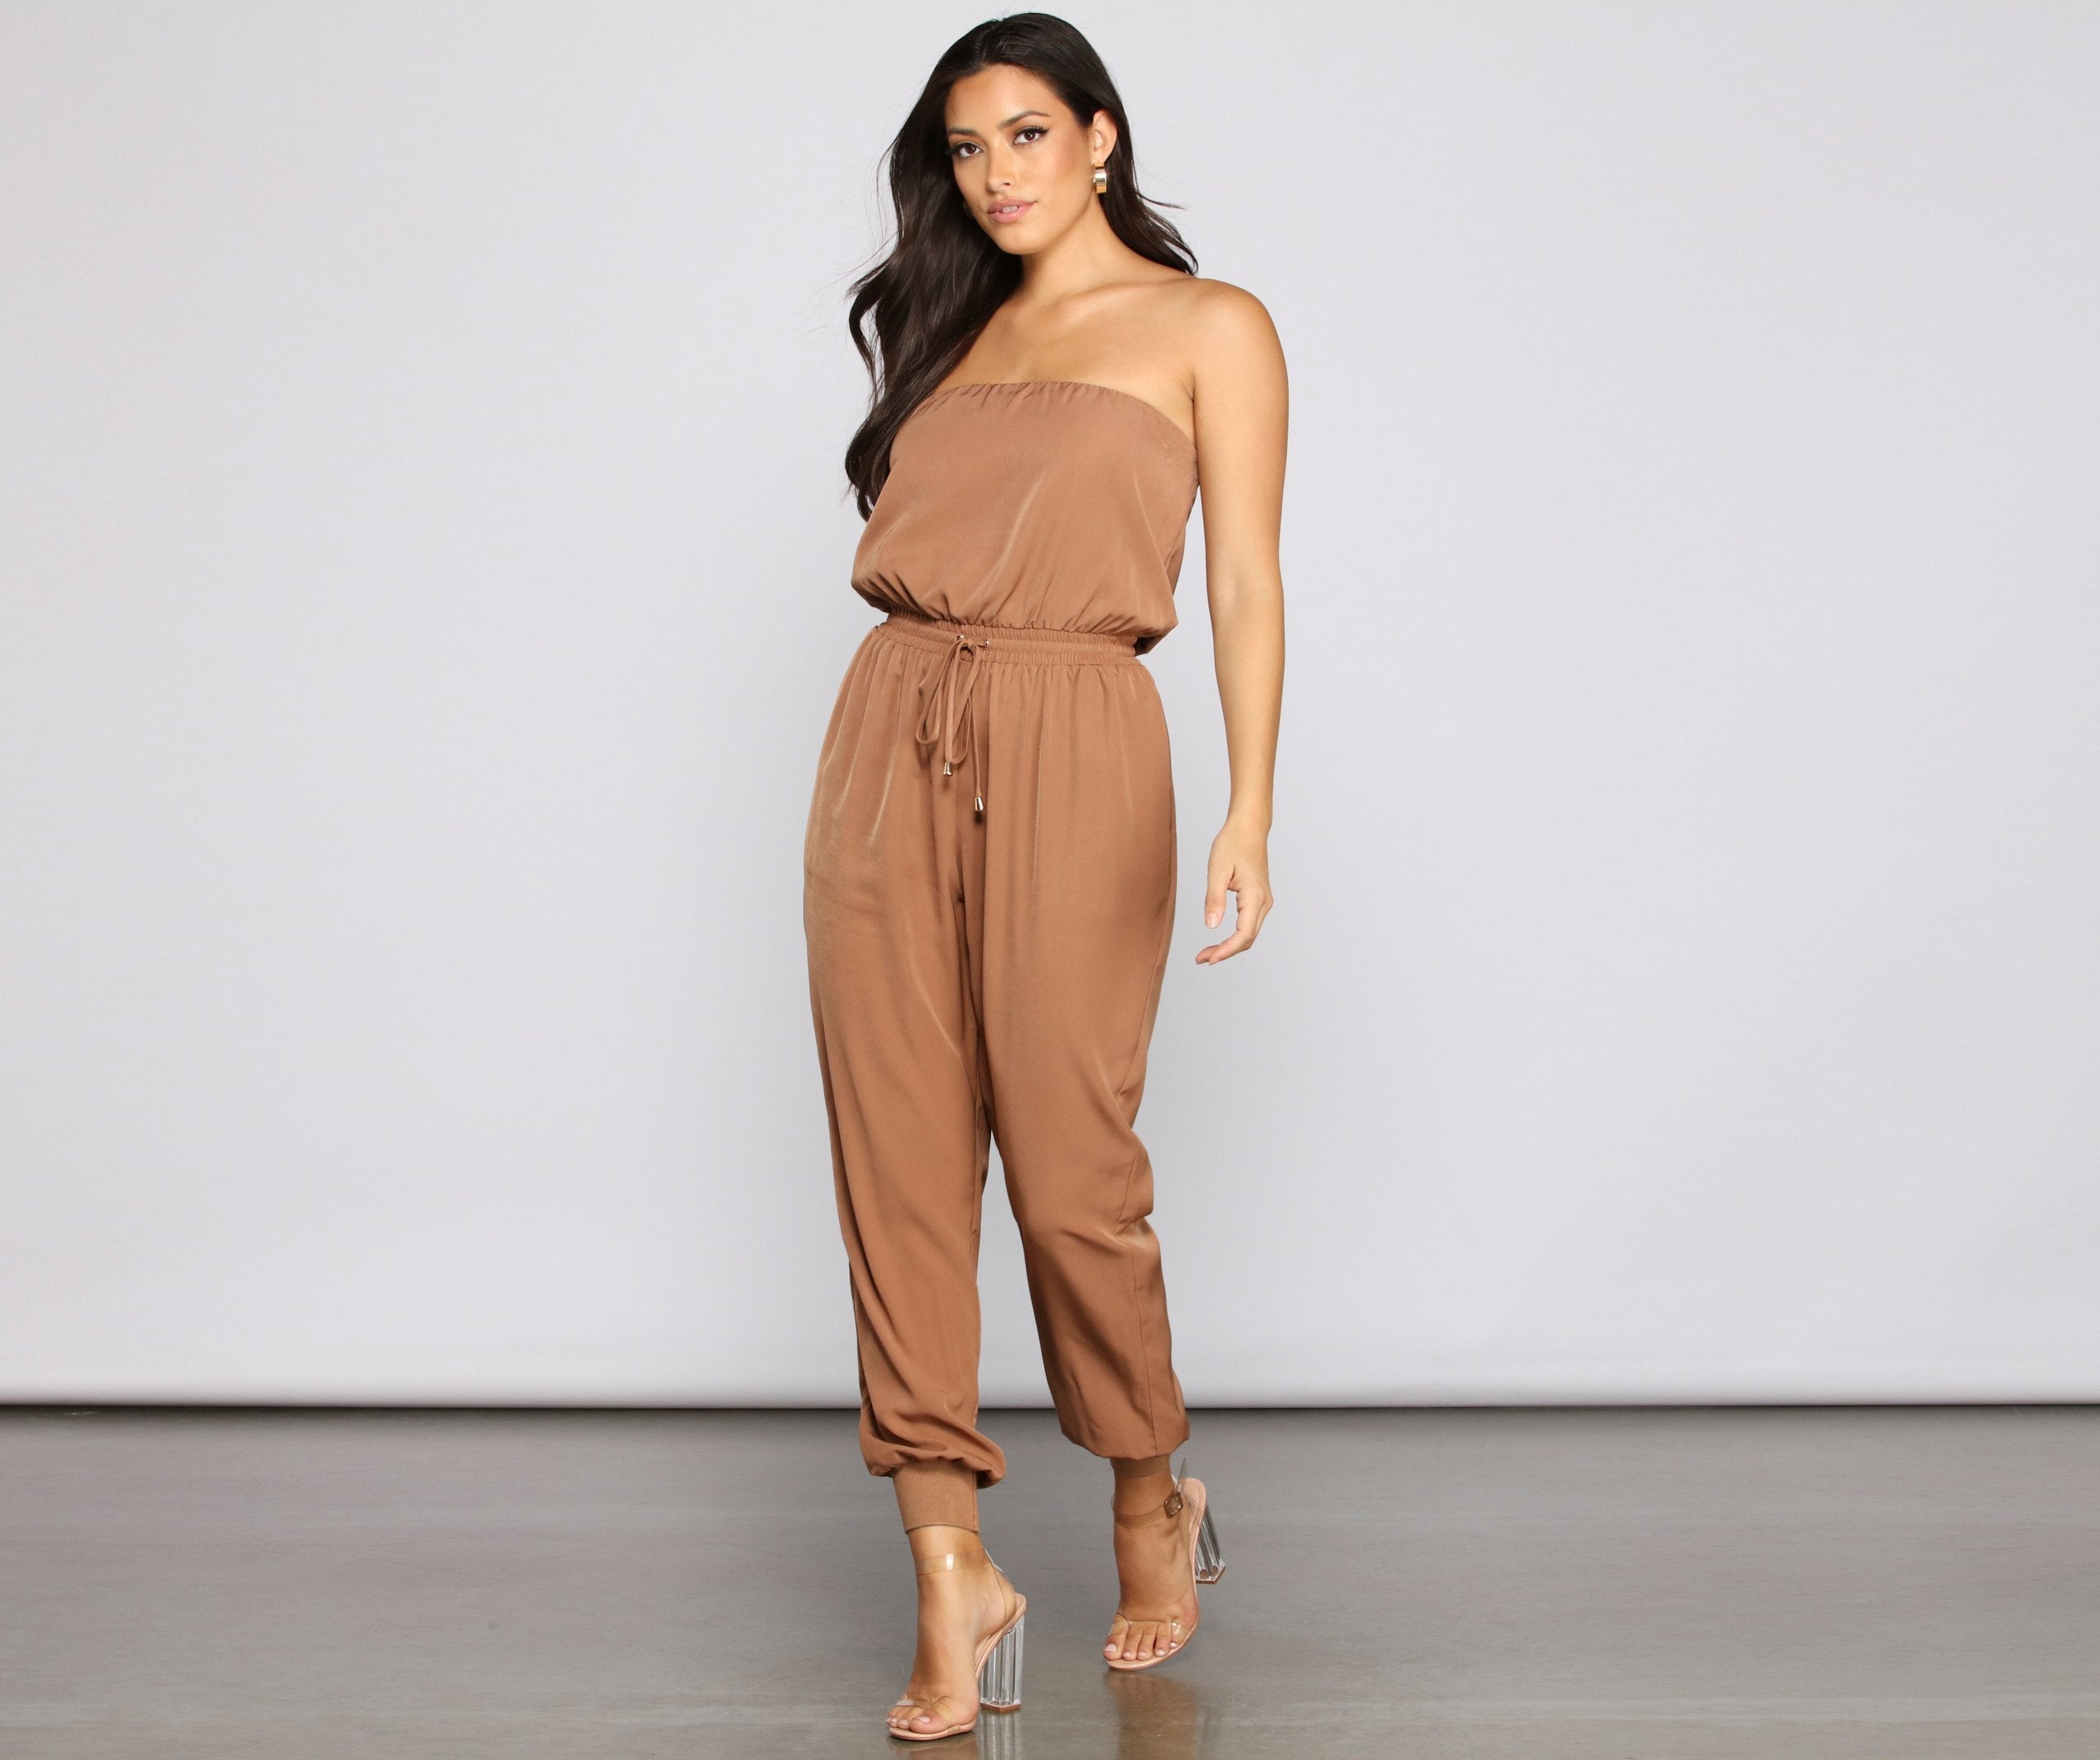 Take On The Day Jogger Jumpsuit - Lady Occasions